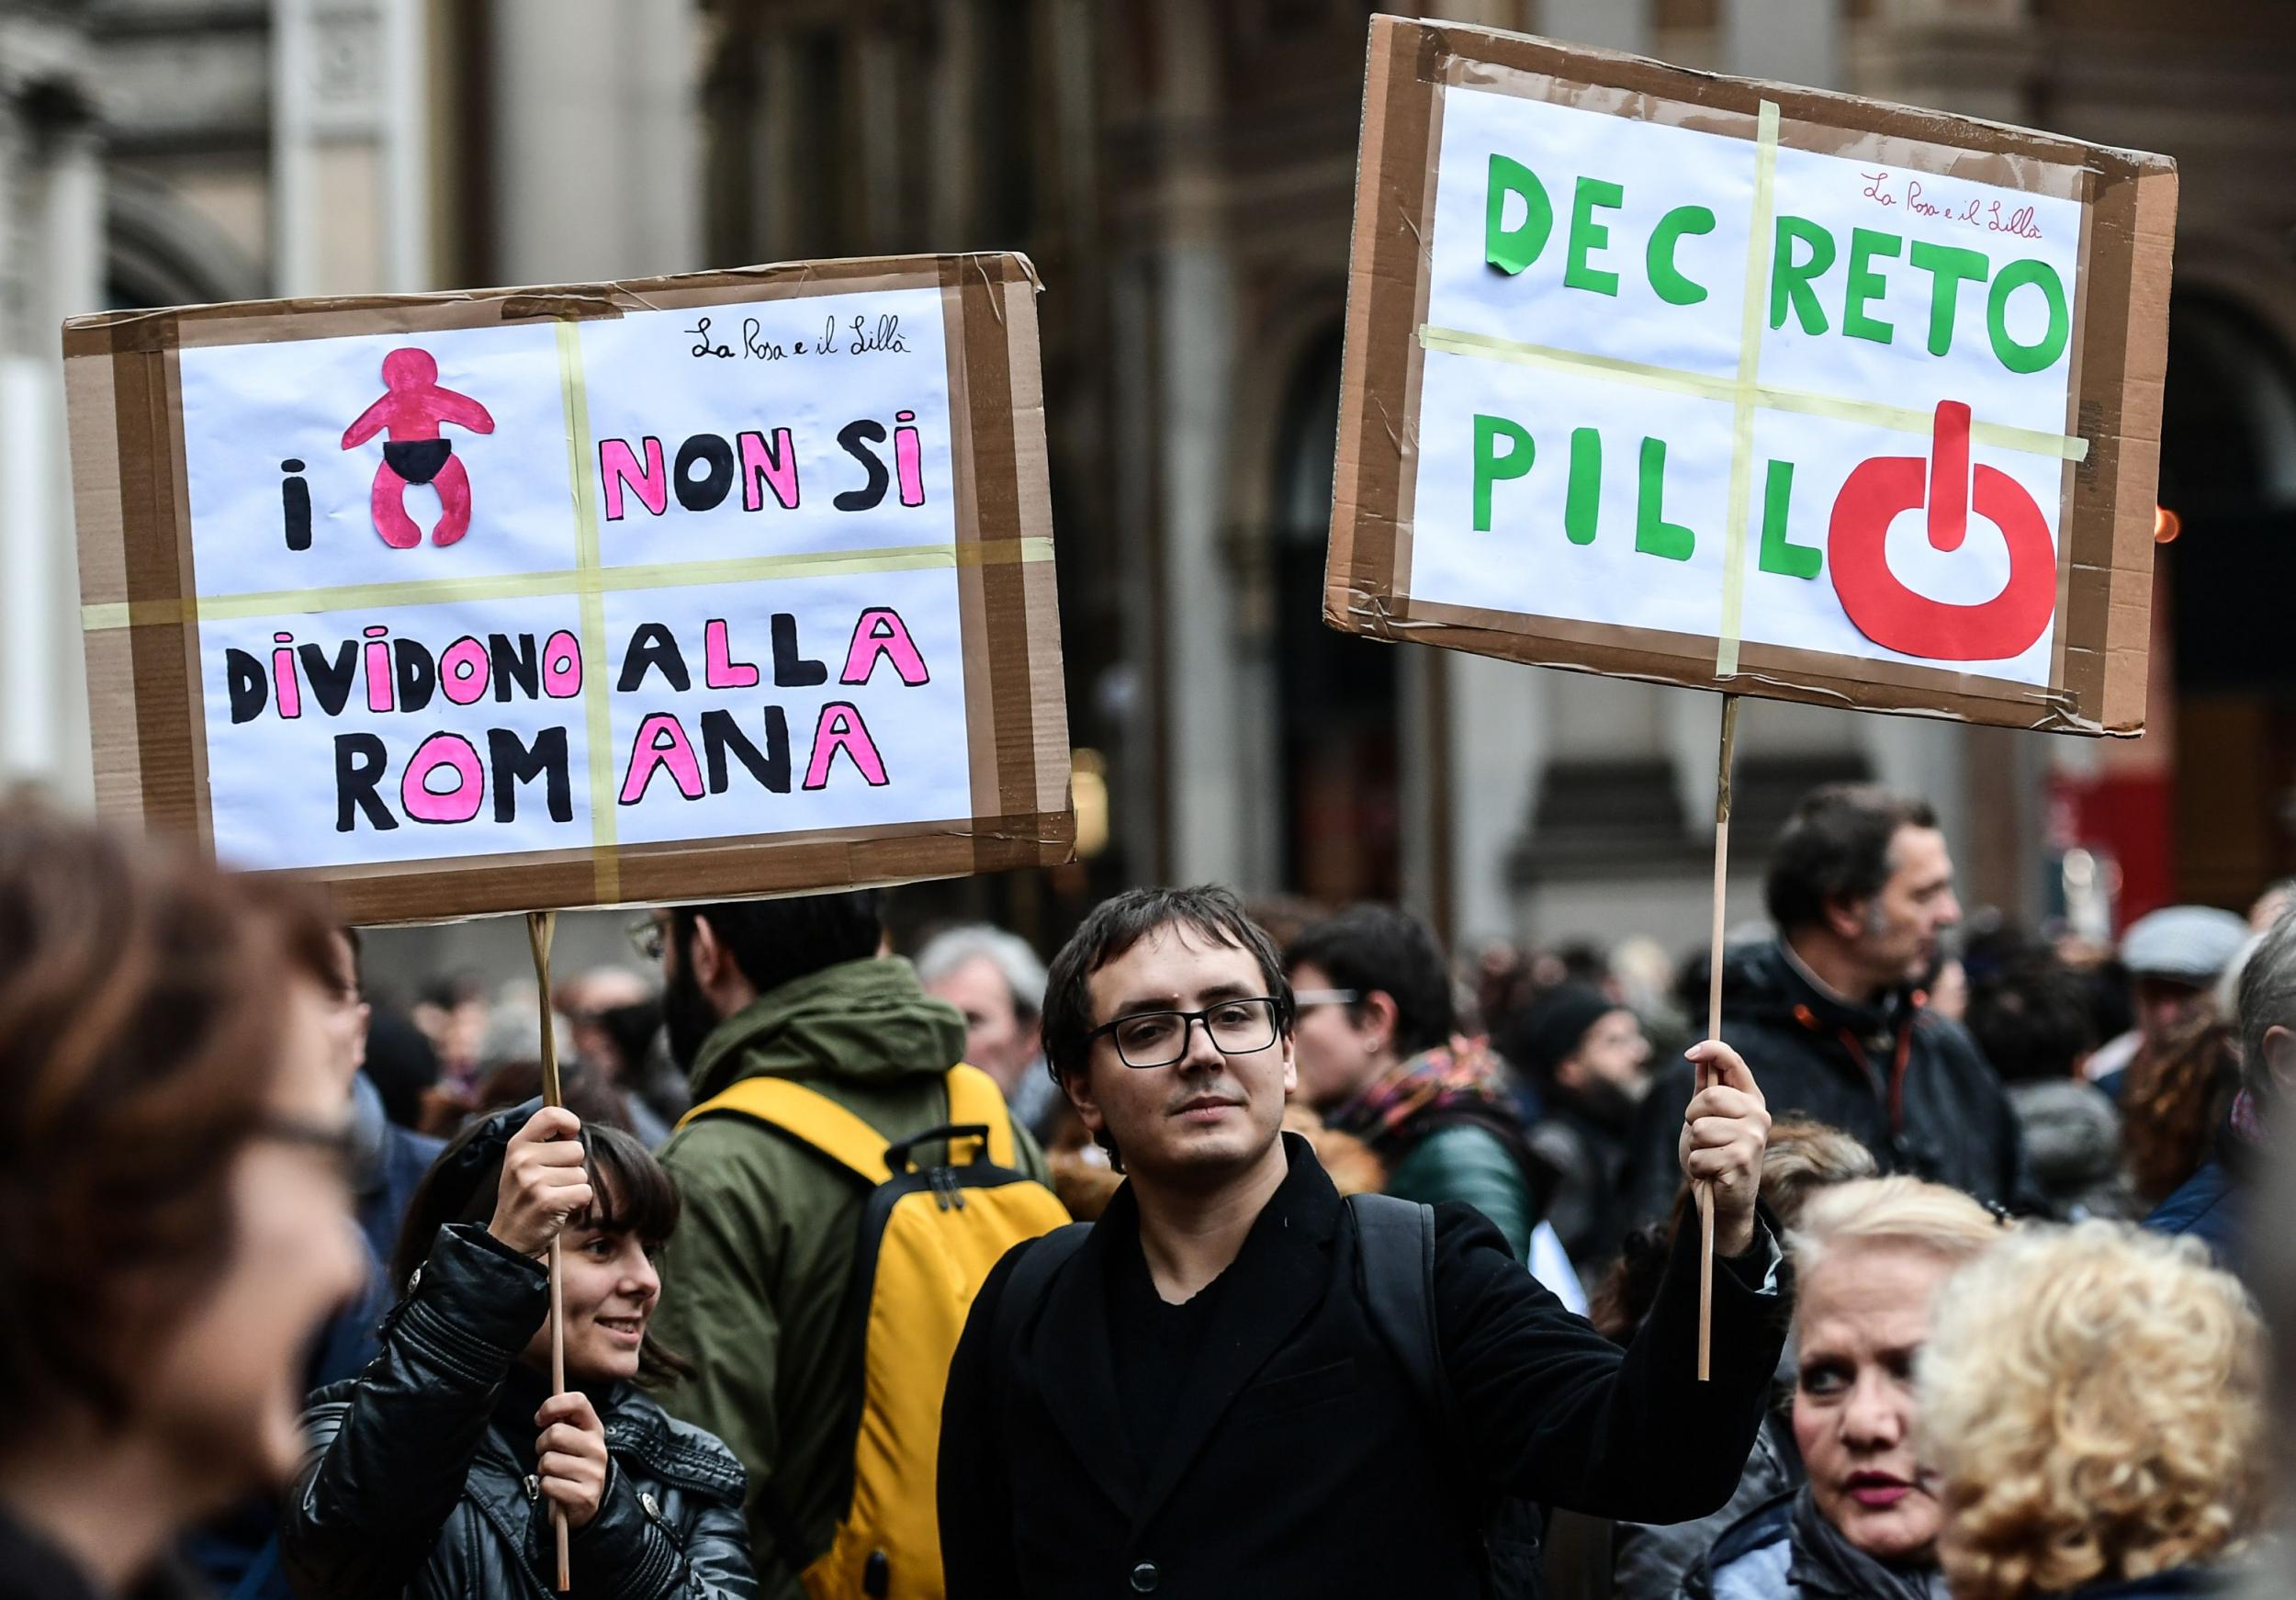 People gather on Piazza della Scala in Milan on 10 November 2018 to protest the so-called Pillon draft bill aimed at changing the rules on the separation of couples and the custody of children